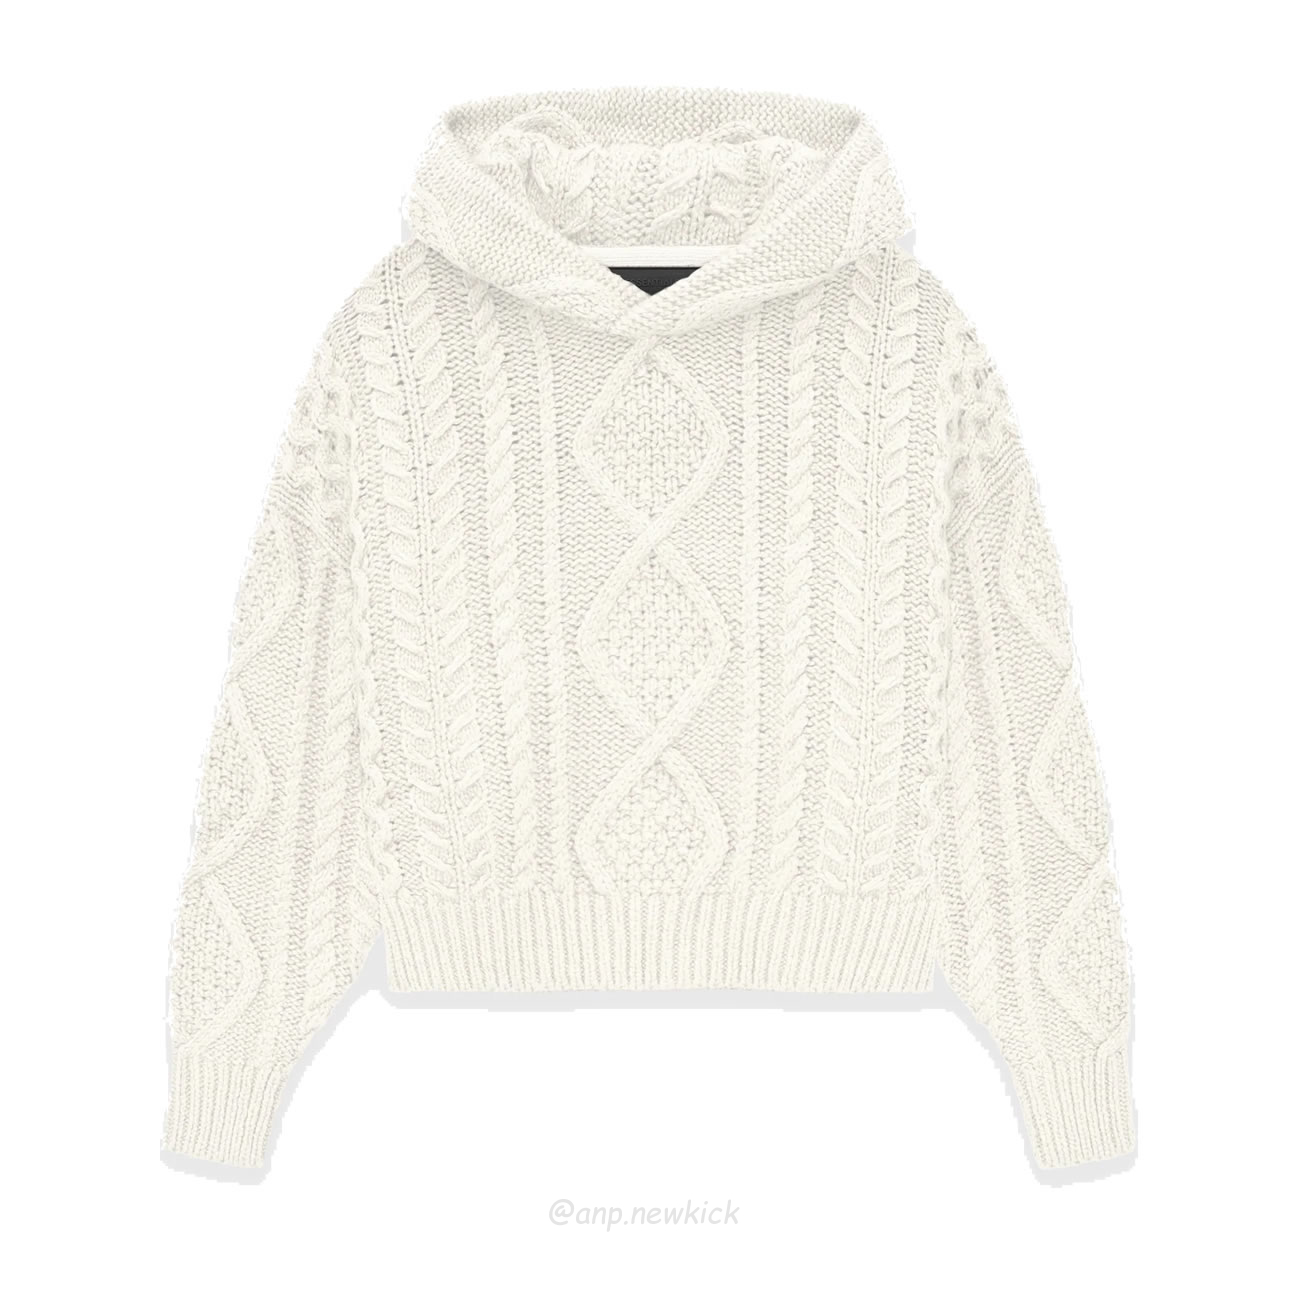 FEAR OF GOD ESSENTIALS FOG 23FW New collection of hooded sweaters in black elephant white beige white S-XL